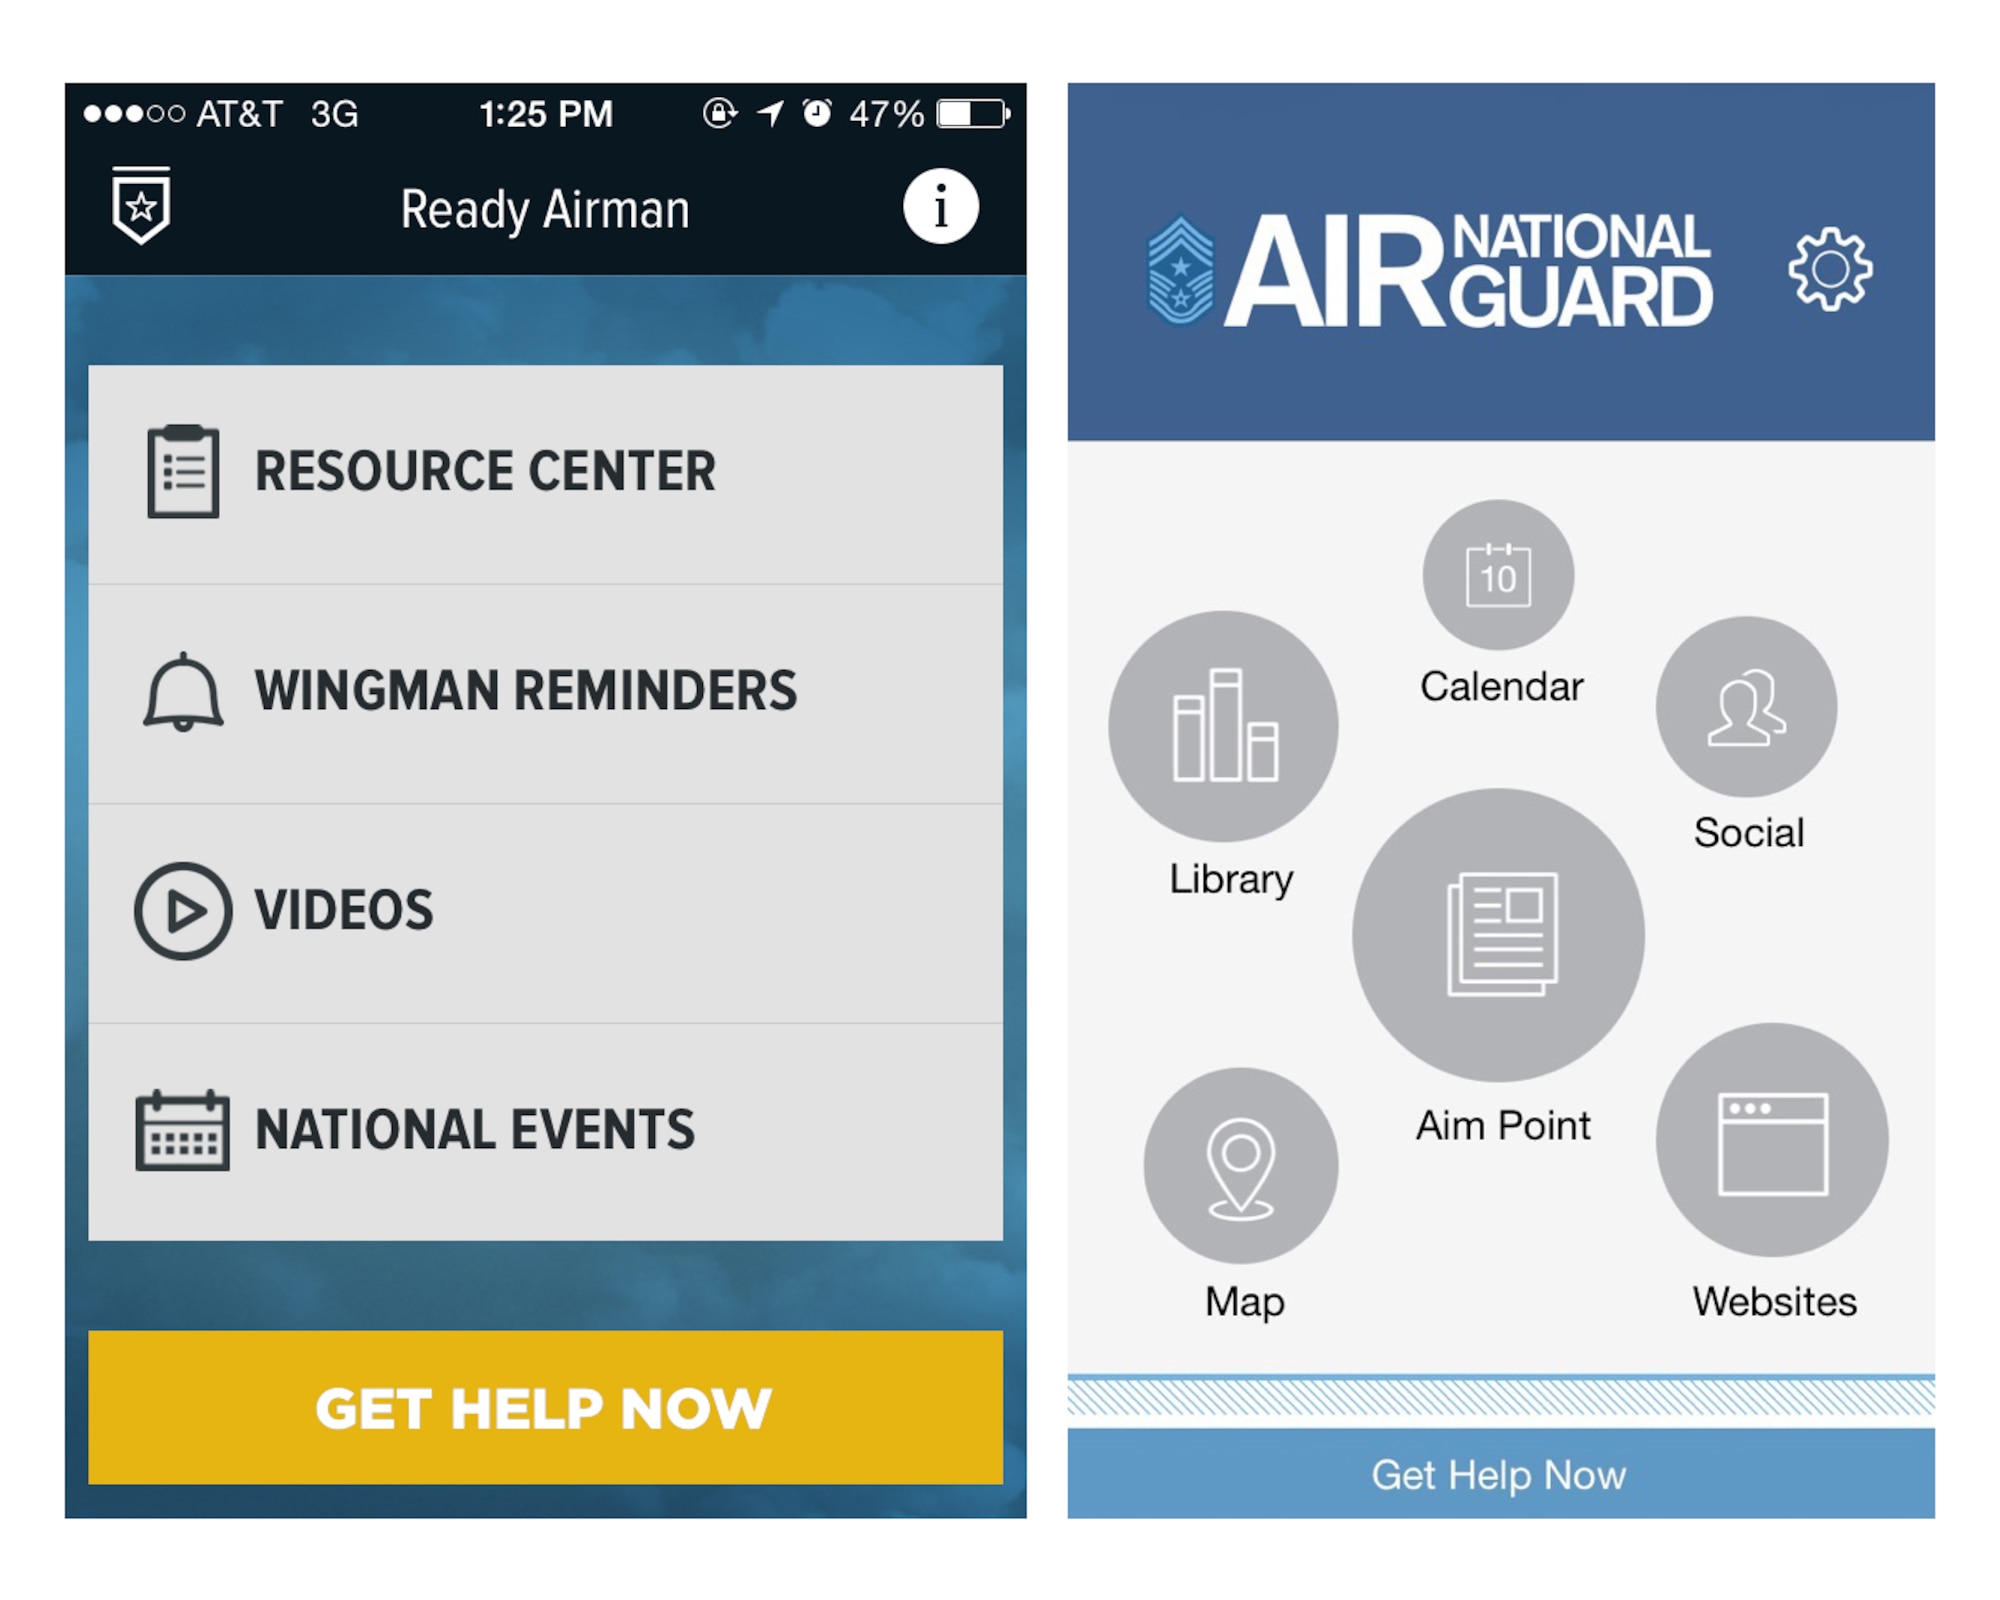 Two new mobile apps from the Air National Guard offer Airmen and their families easy access to a variety of tools and information on leadership and resilience. The Ready Airman app (left) and the Air National Guard CCM Mobile app (right) were produced by the Air National Guard Community Action Information Board and the ANG Safety Directorate. (U.S. Air National Guard photo)